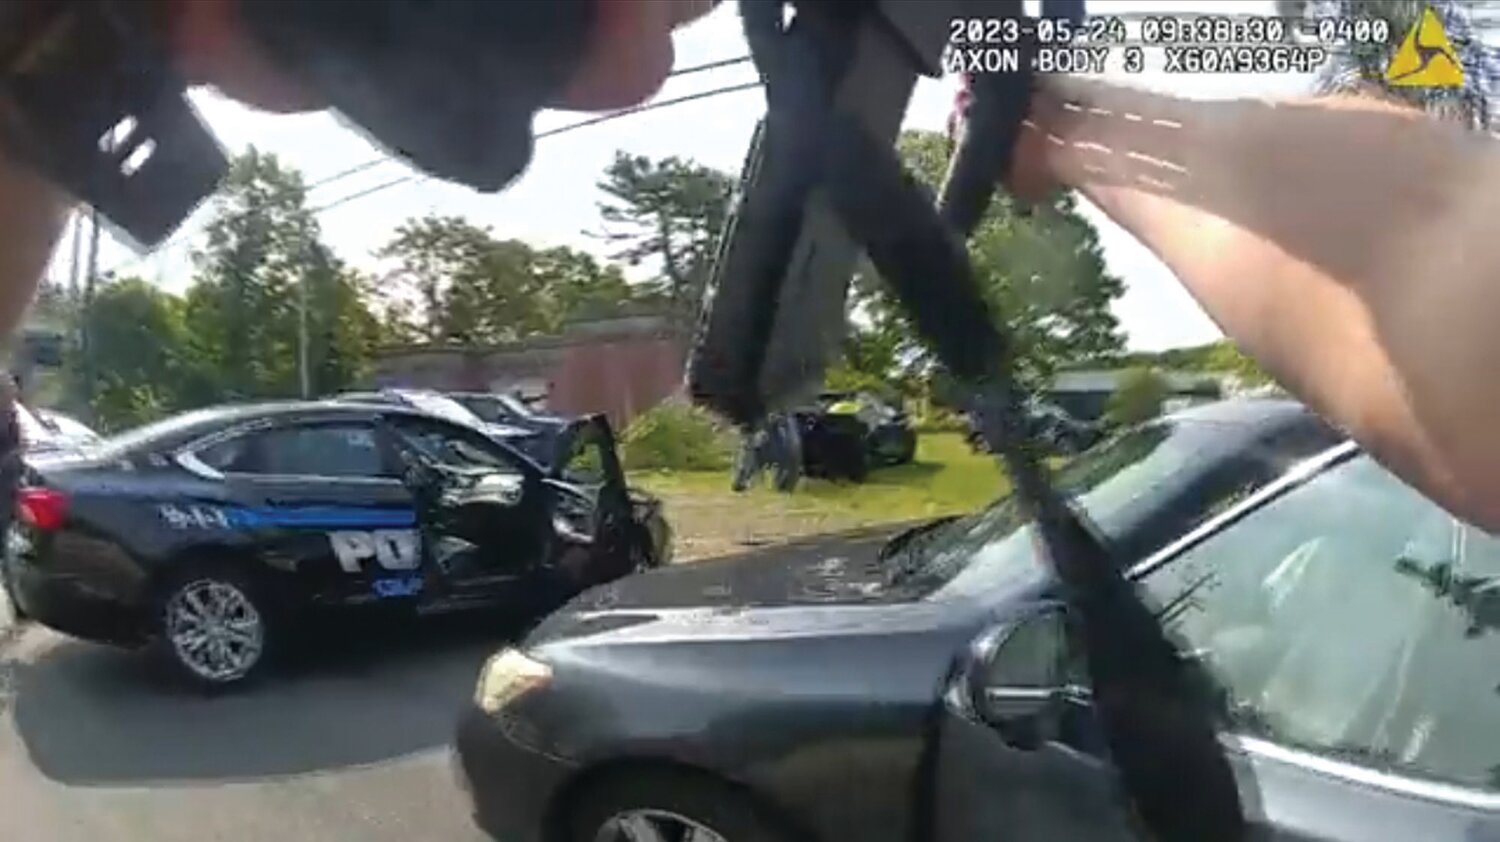 HEAVY POLICE PRESENCE: Police from multiple departments converged on a shooting suspect’s car along Plainfield Pike, on the Johnston/Cranston border, on May 24. The suspect was shot dead, and Cranston Police have now released body-worn camera footage from the deadly force incident.